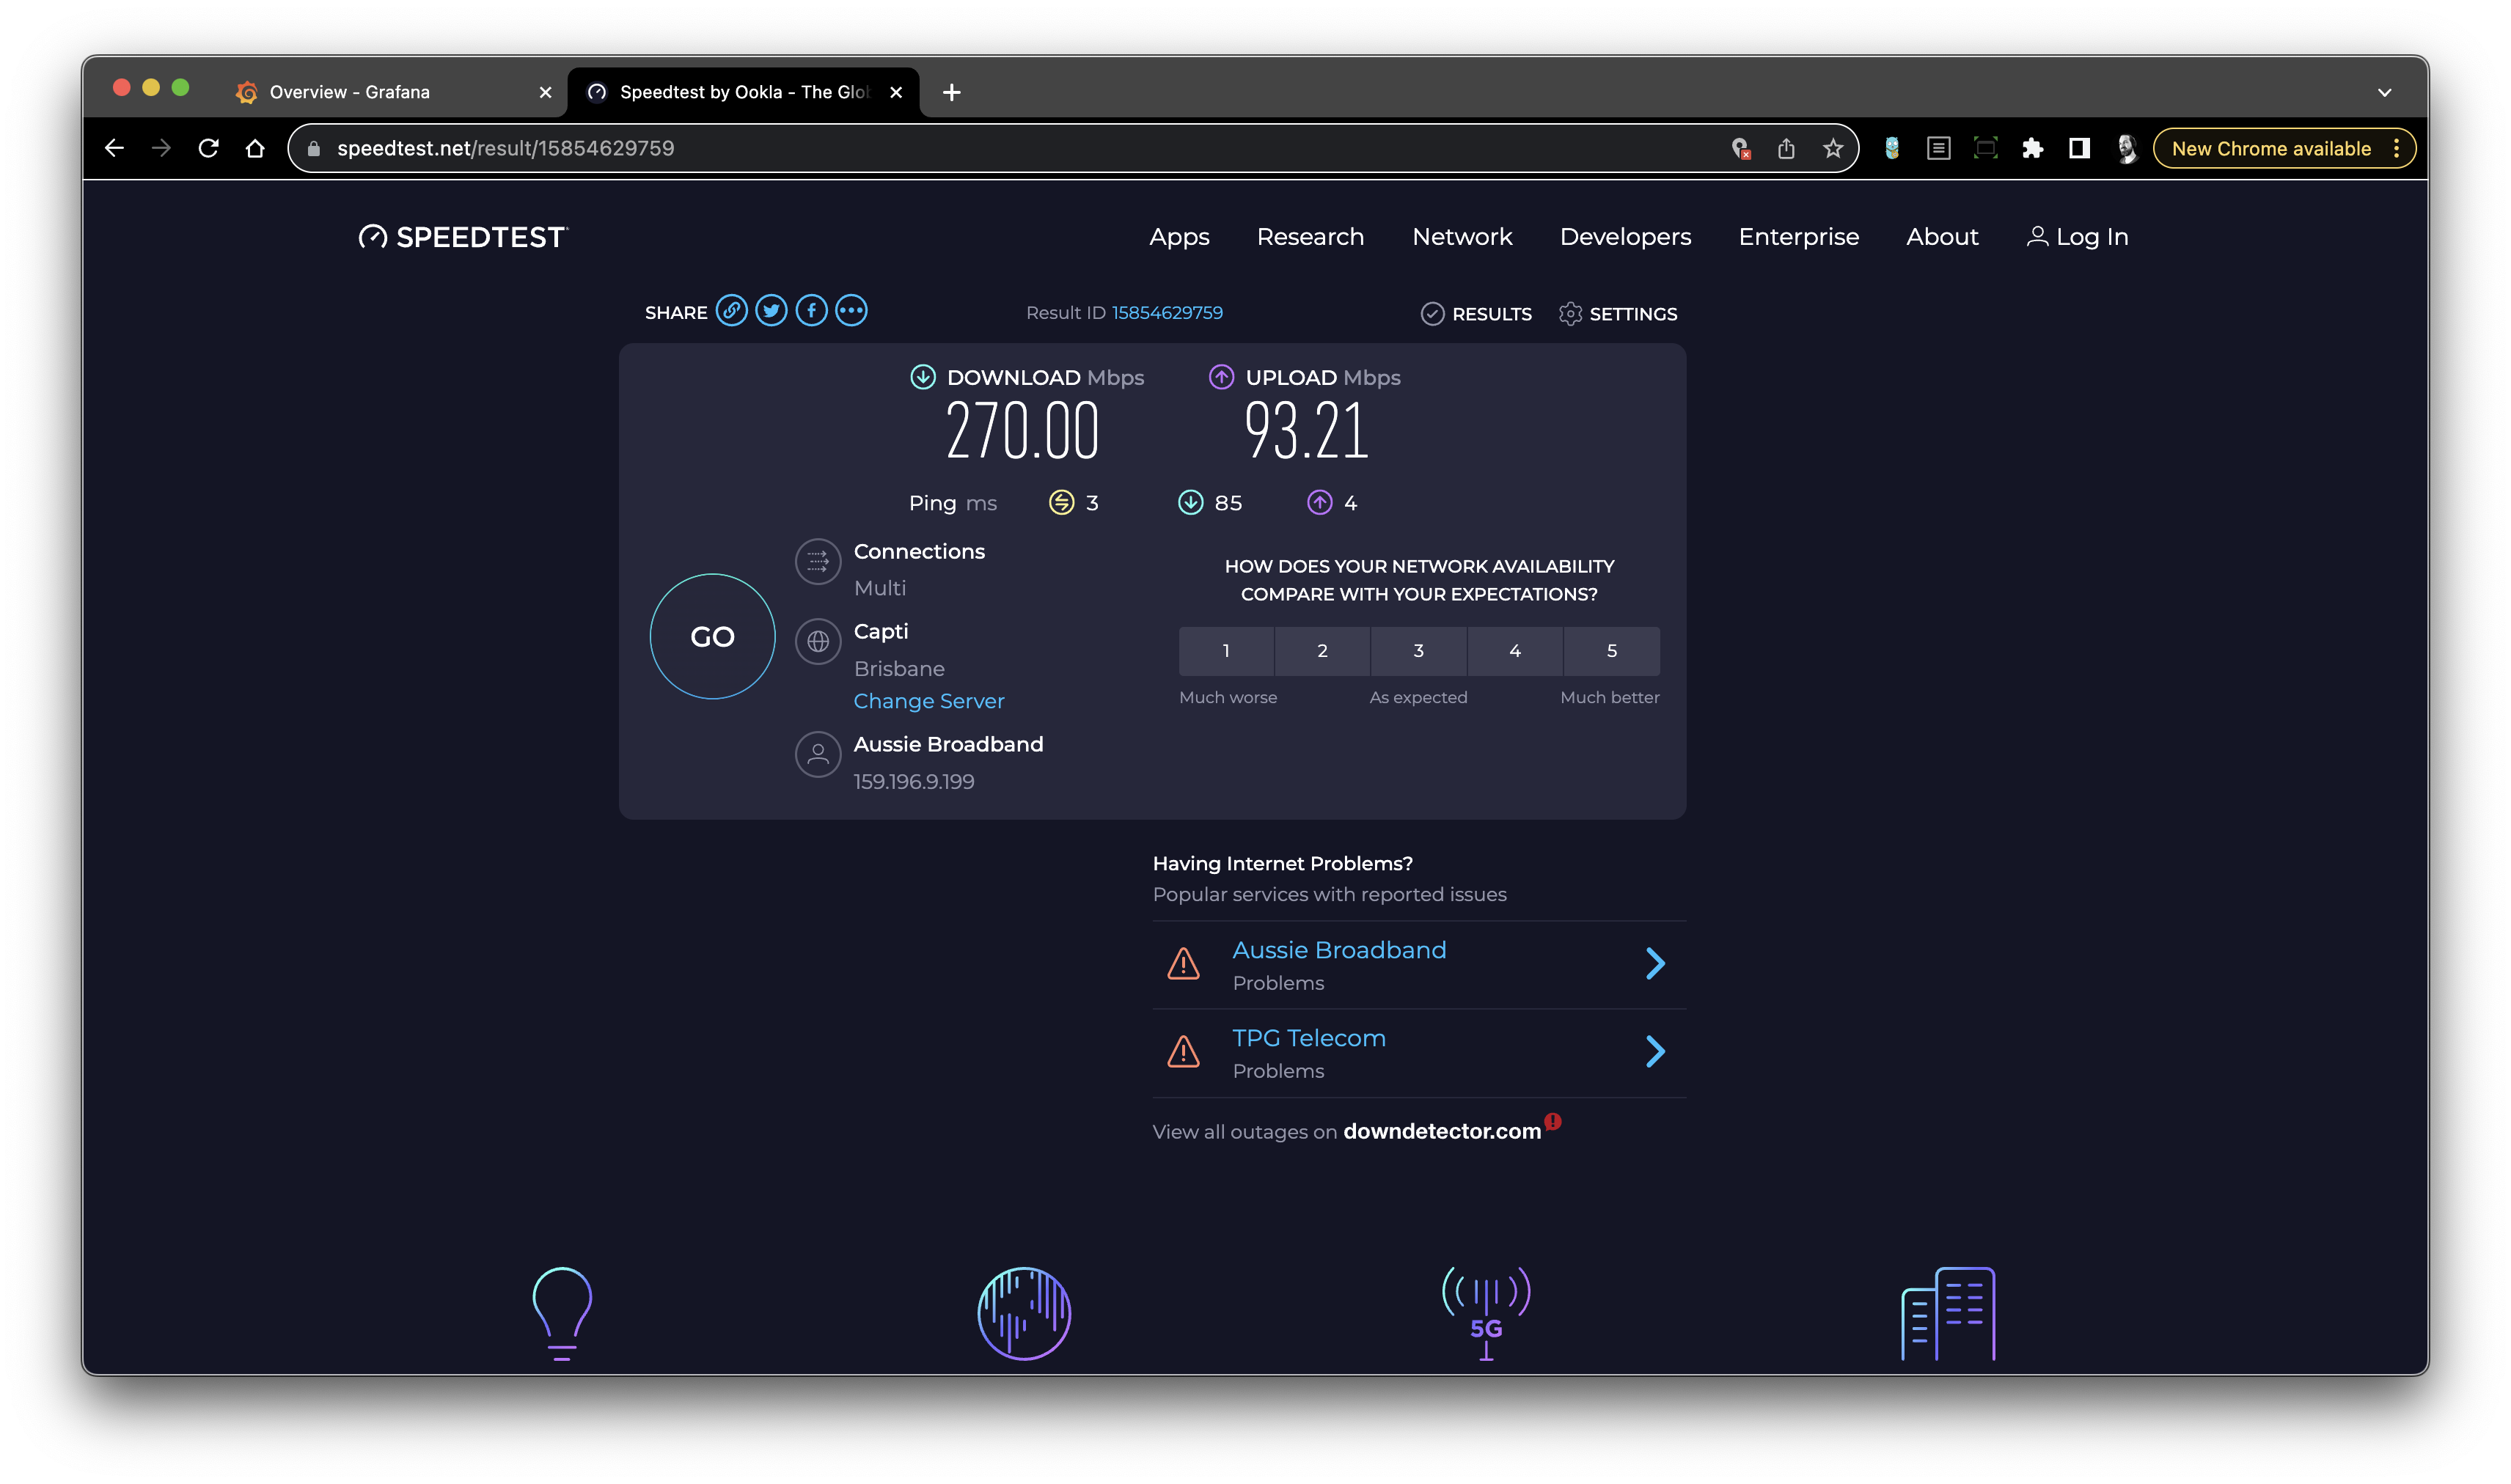 Performance of FTTP after the upgrade